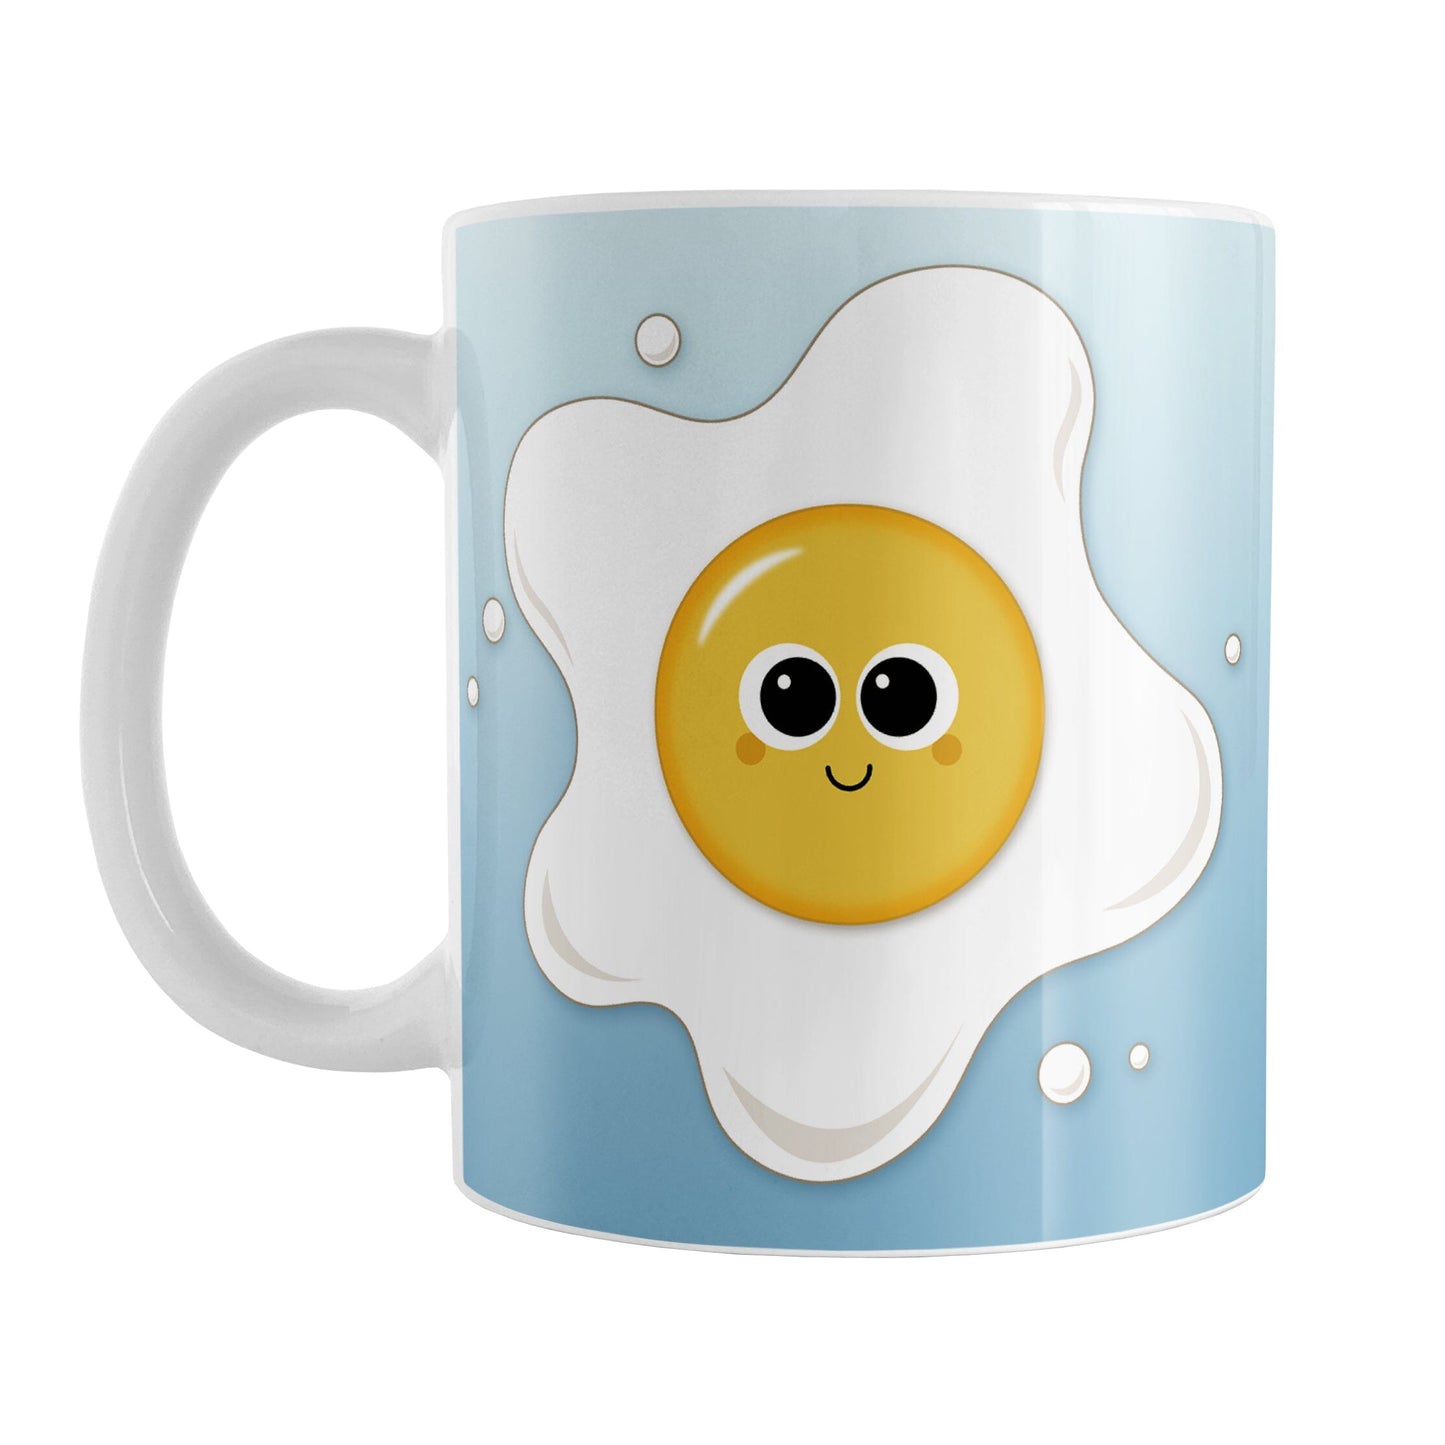 Cute Fried Egg Blue Breakfast Mug (11oz) at Amy's Coffee Mugs. A ceramic coffee mug designed with a cute and happy fried egg on both sides of the mug over a gradient blue background color that wraps around the mug up to the handle.